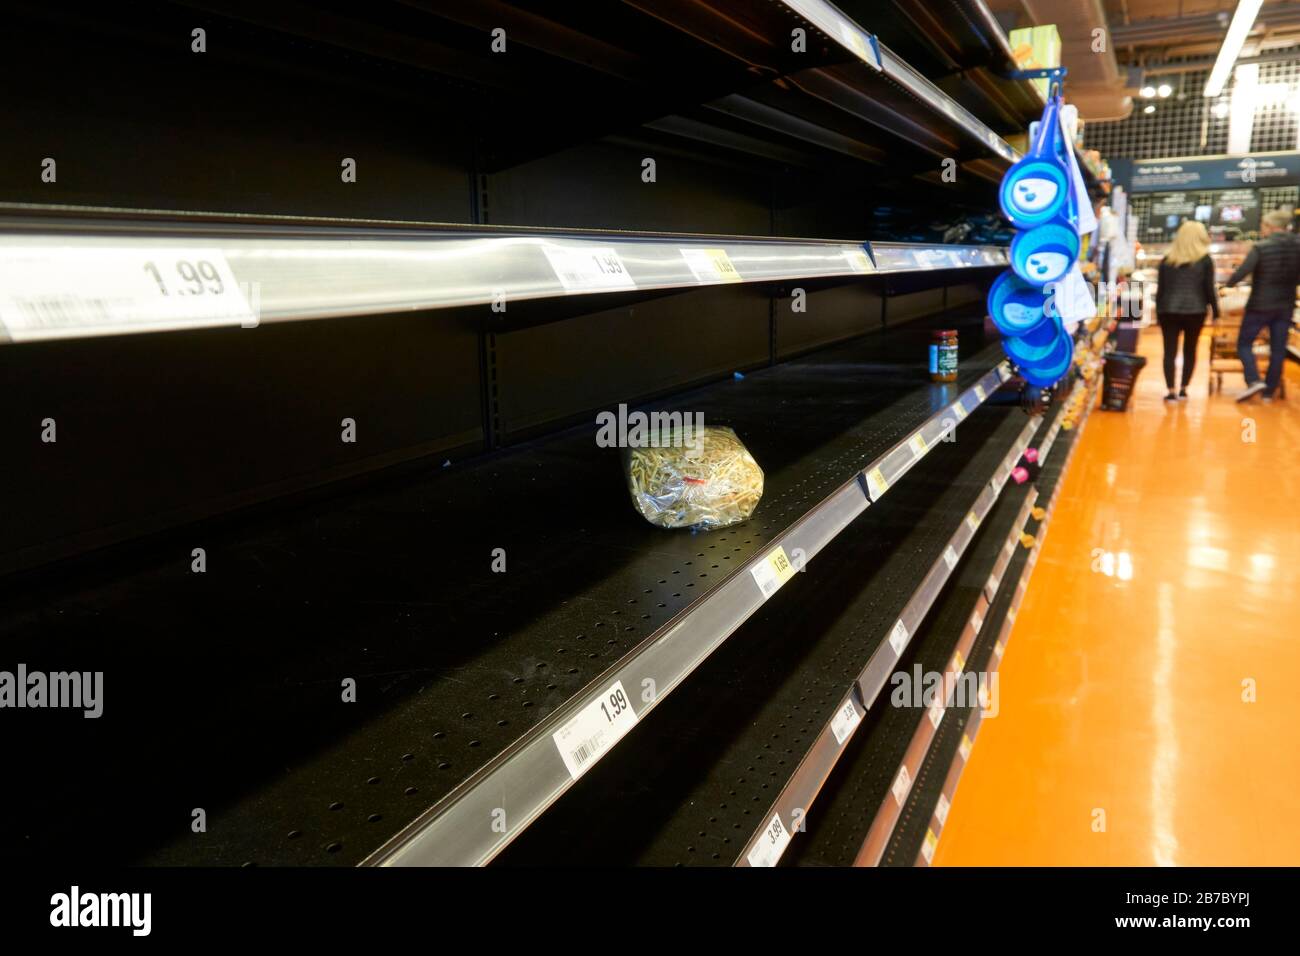 Vancouver, Canada, 14 March 2020 -- Grocery store shelves empty as shoppers stock up on essential food items during the COVID-19 (Coronavirus) pandemic. Stock Photo